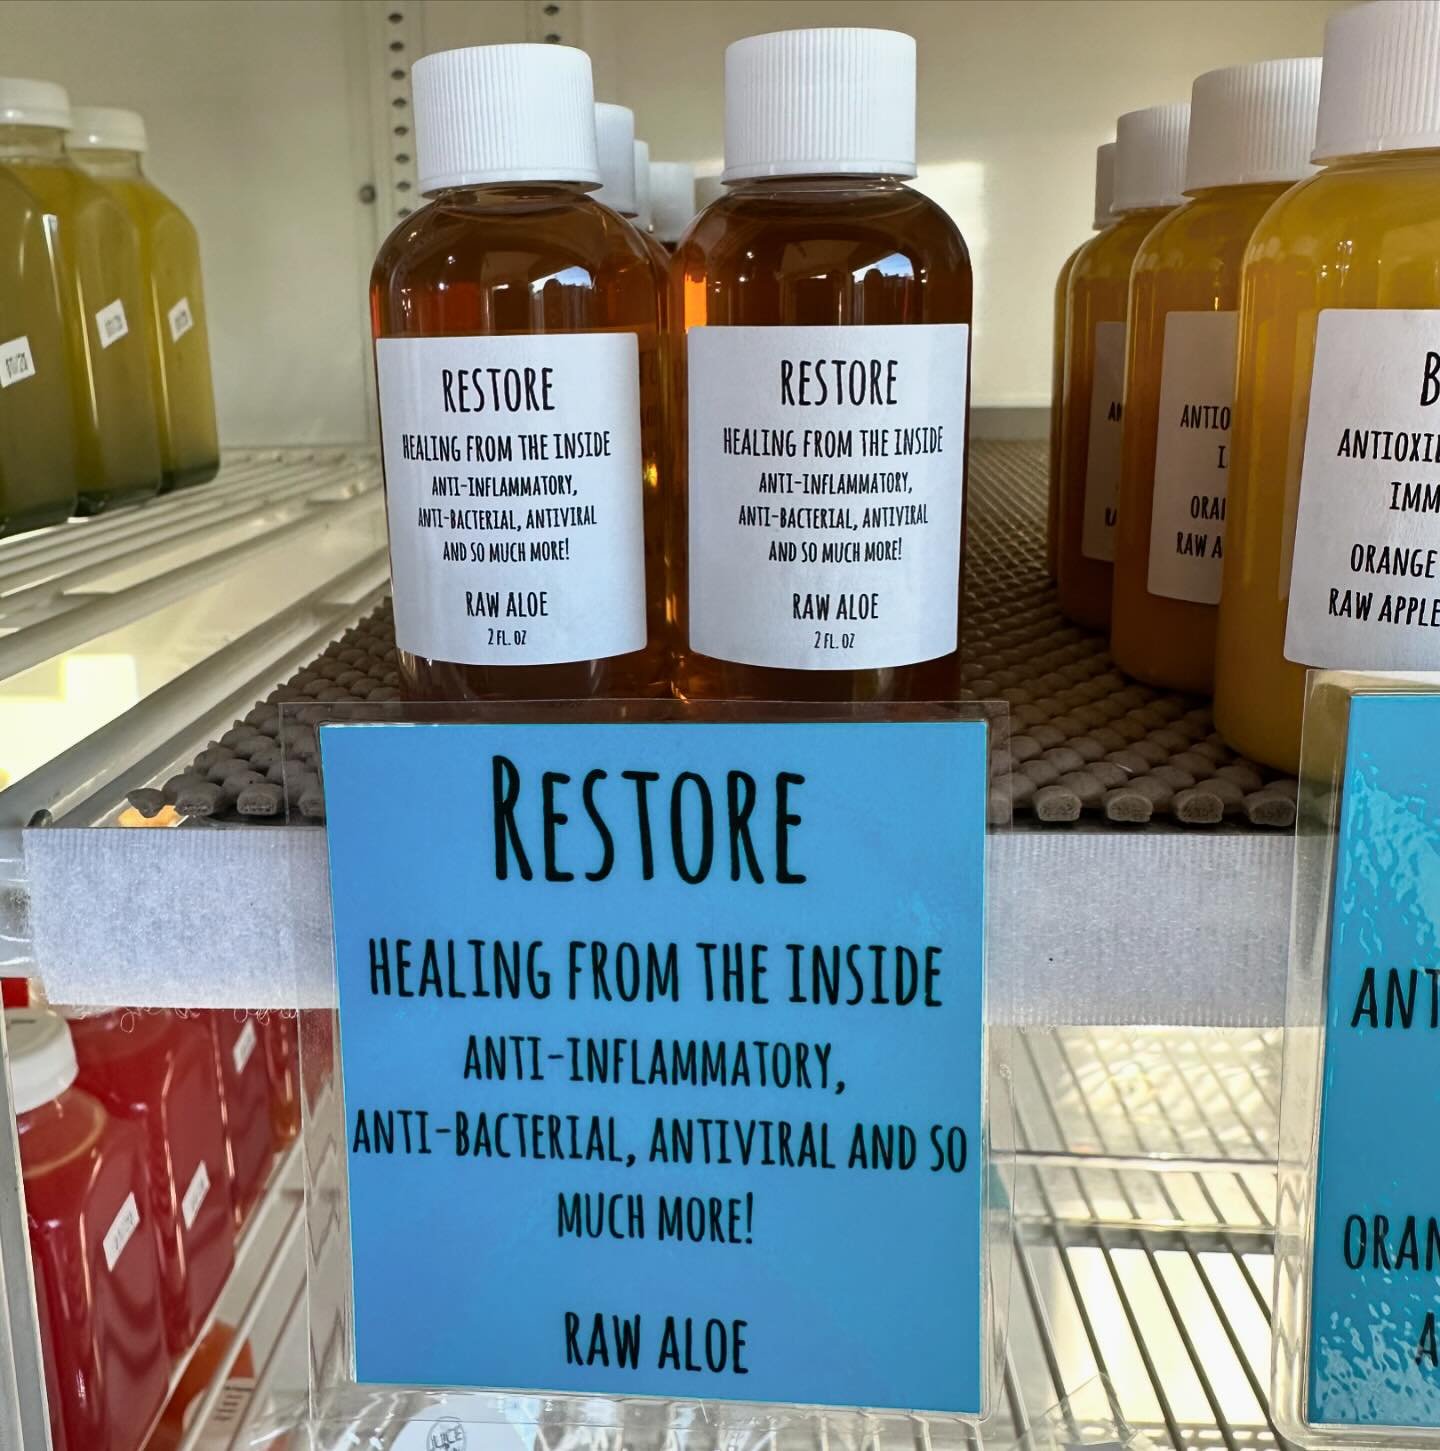 Come check out our restore wellness shot that helps with healing from the inside, is an anti-inflammatory, anti-bacterial, antiviral, and so much more!

#juiceonmain #localjuicebar #wellness #healthylifestyle #organic #plantbased #greens #coldpressed